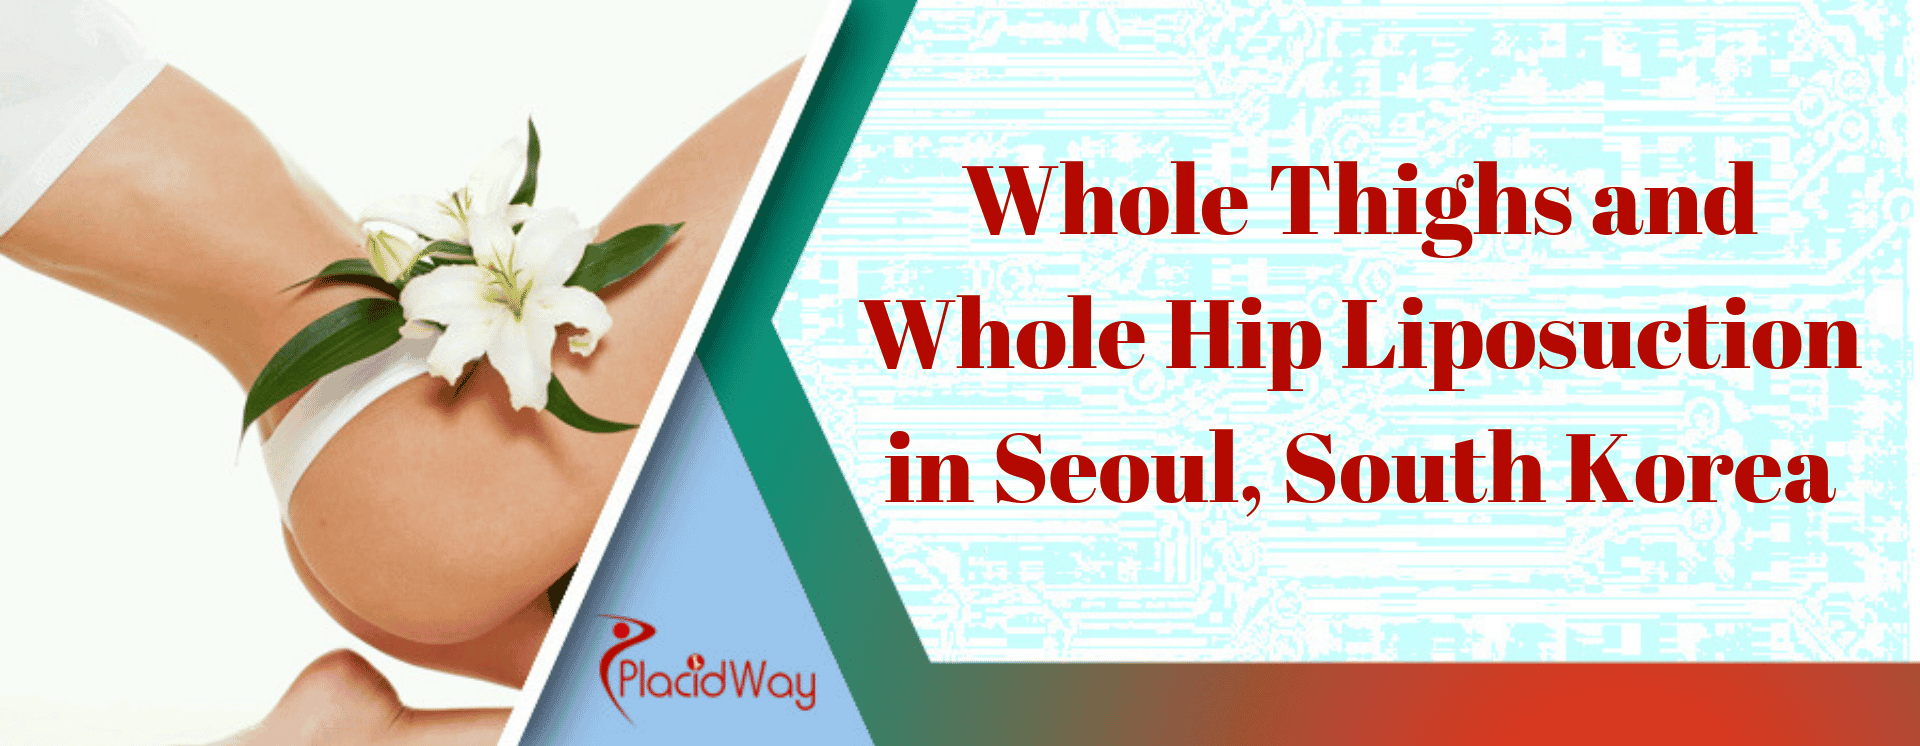 Whole Thighs and Whole Hip Liposuction in Seoul, South Korea